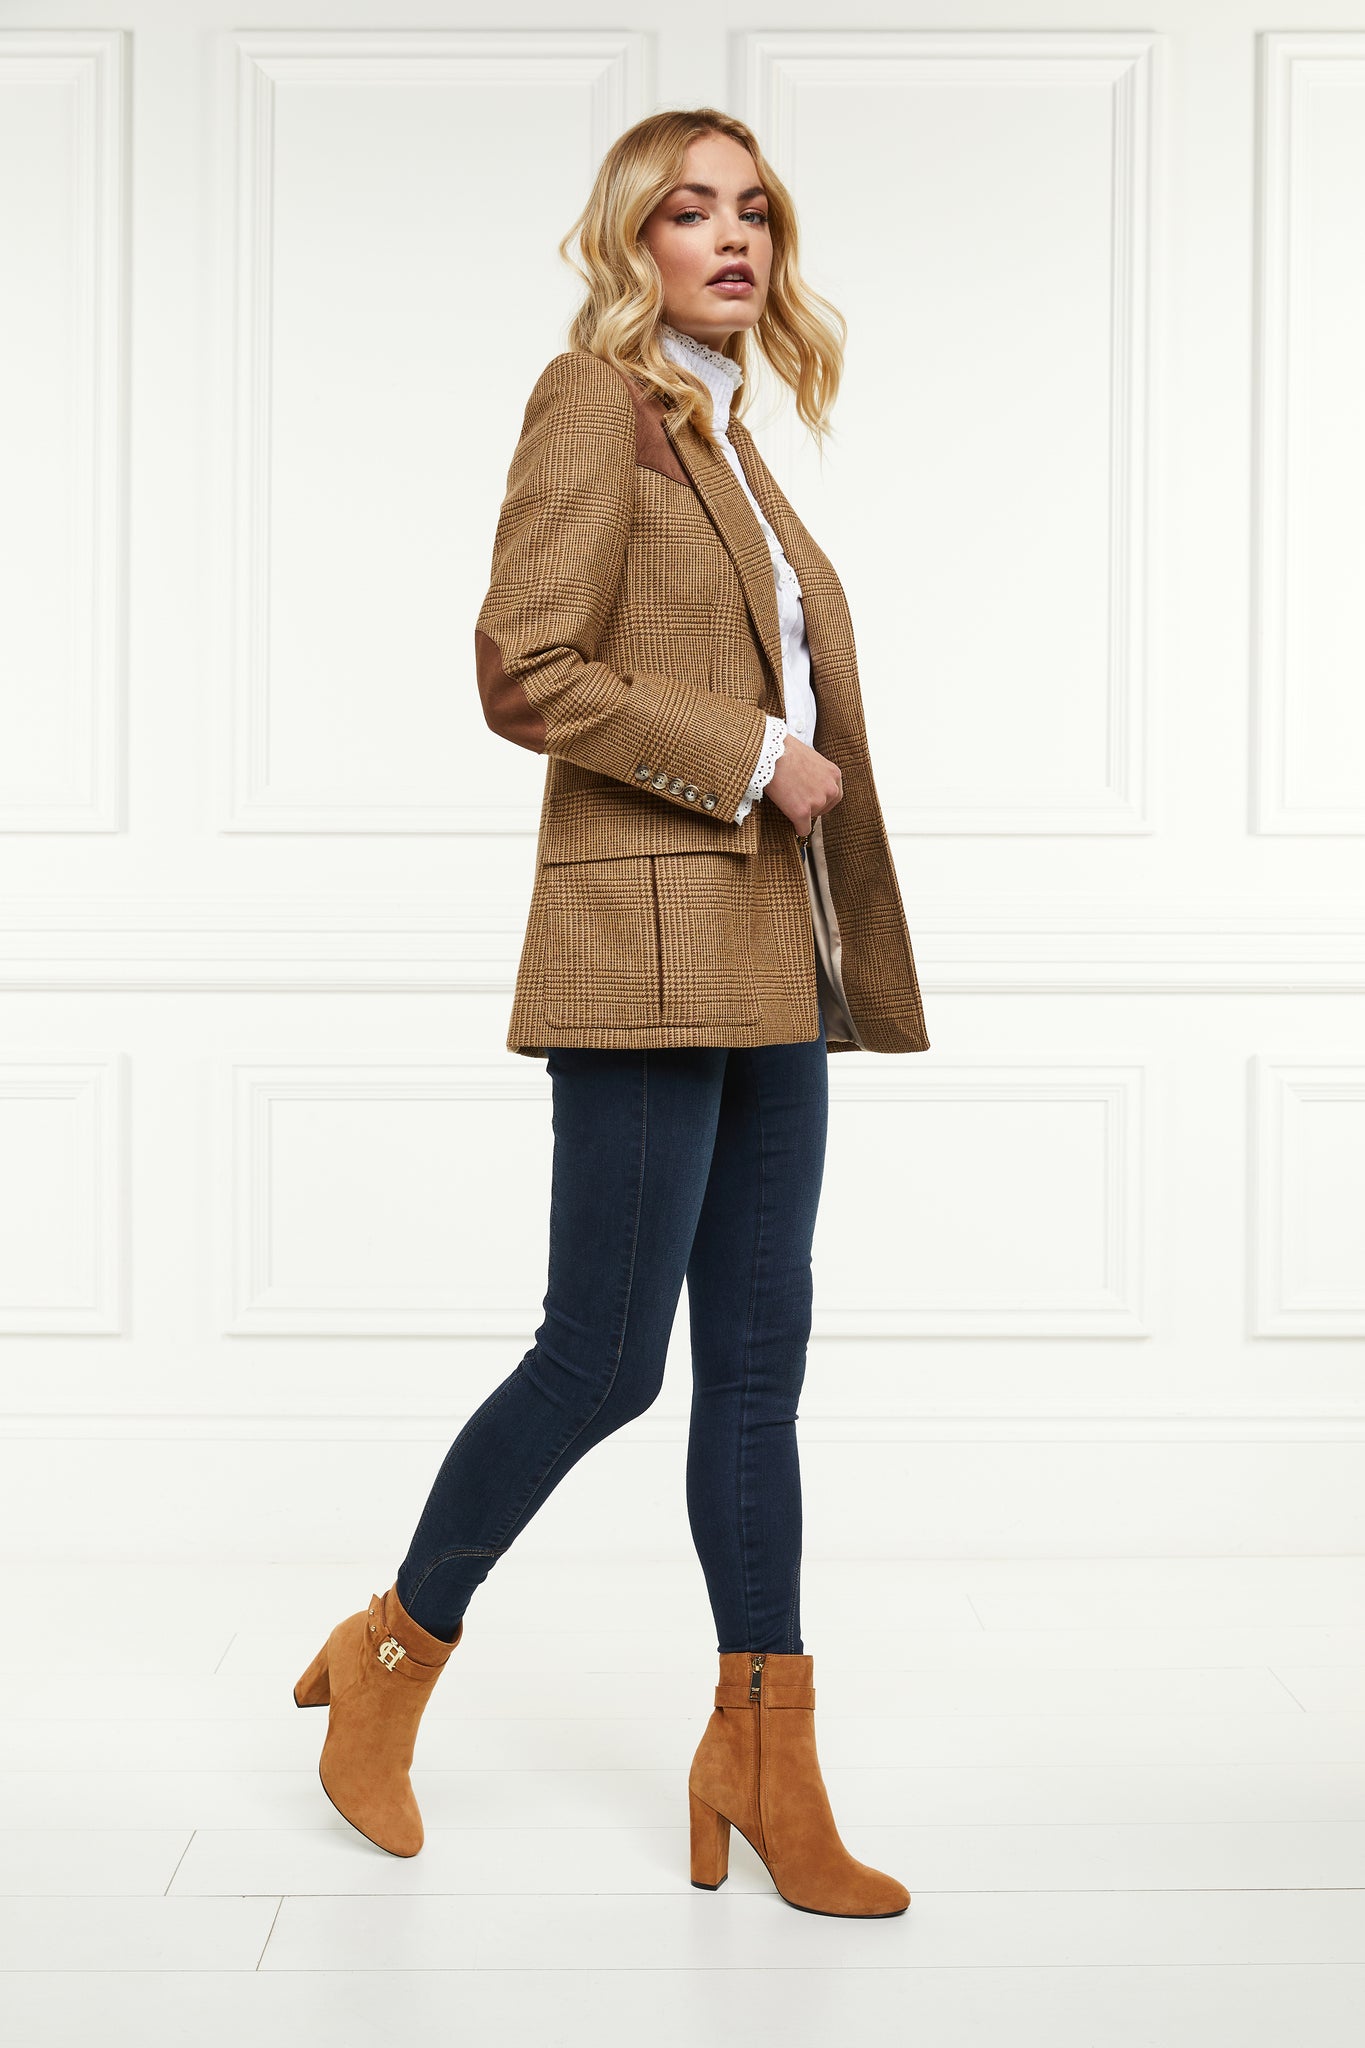 Mayfair Suede Ankle Boot (Tan)